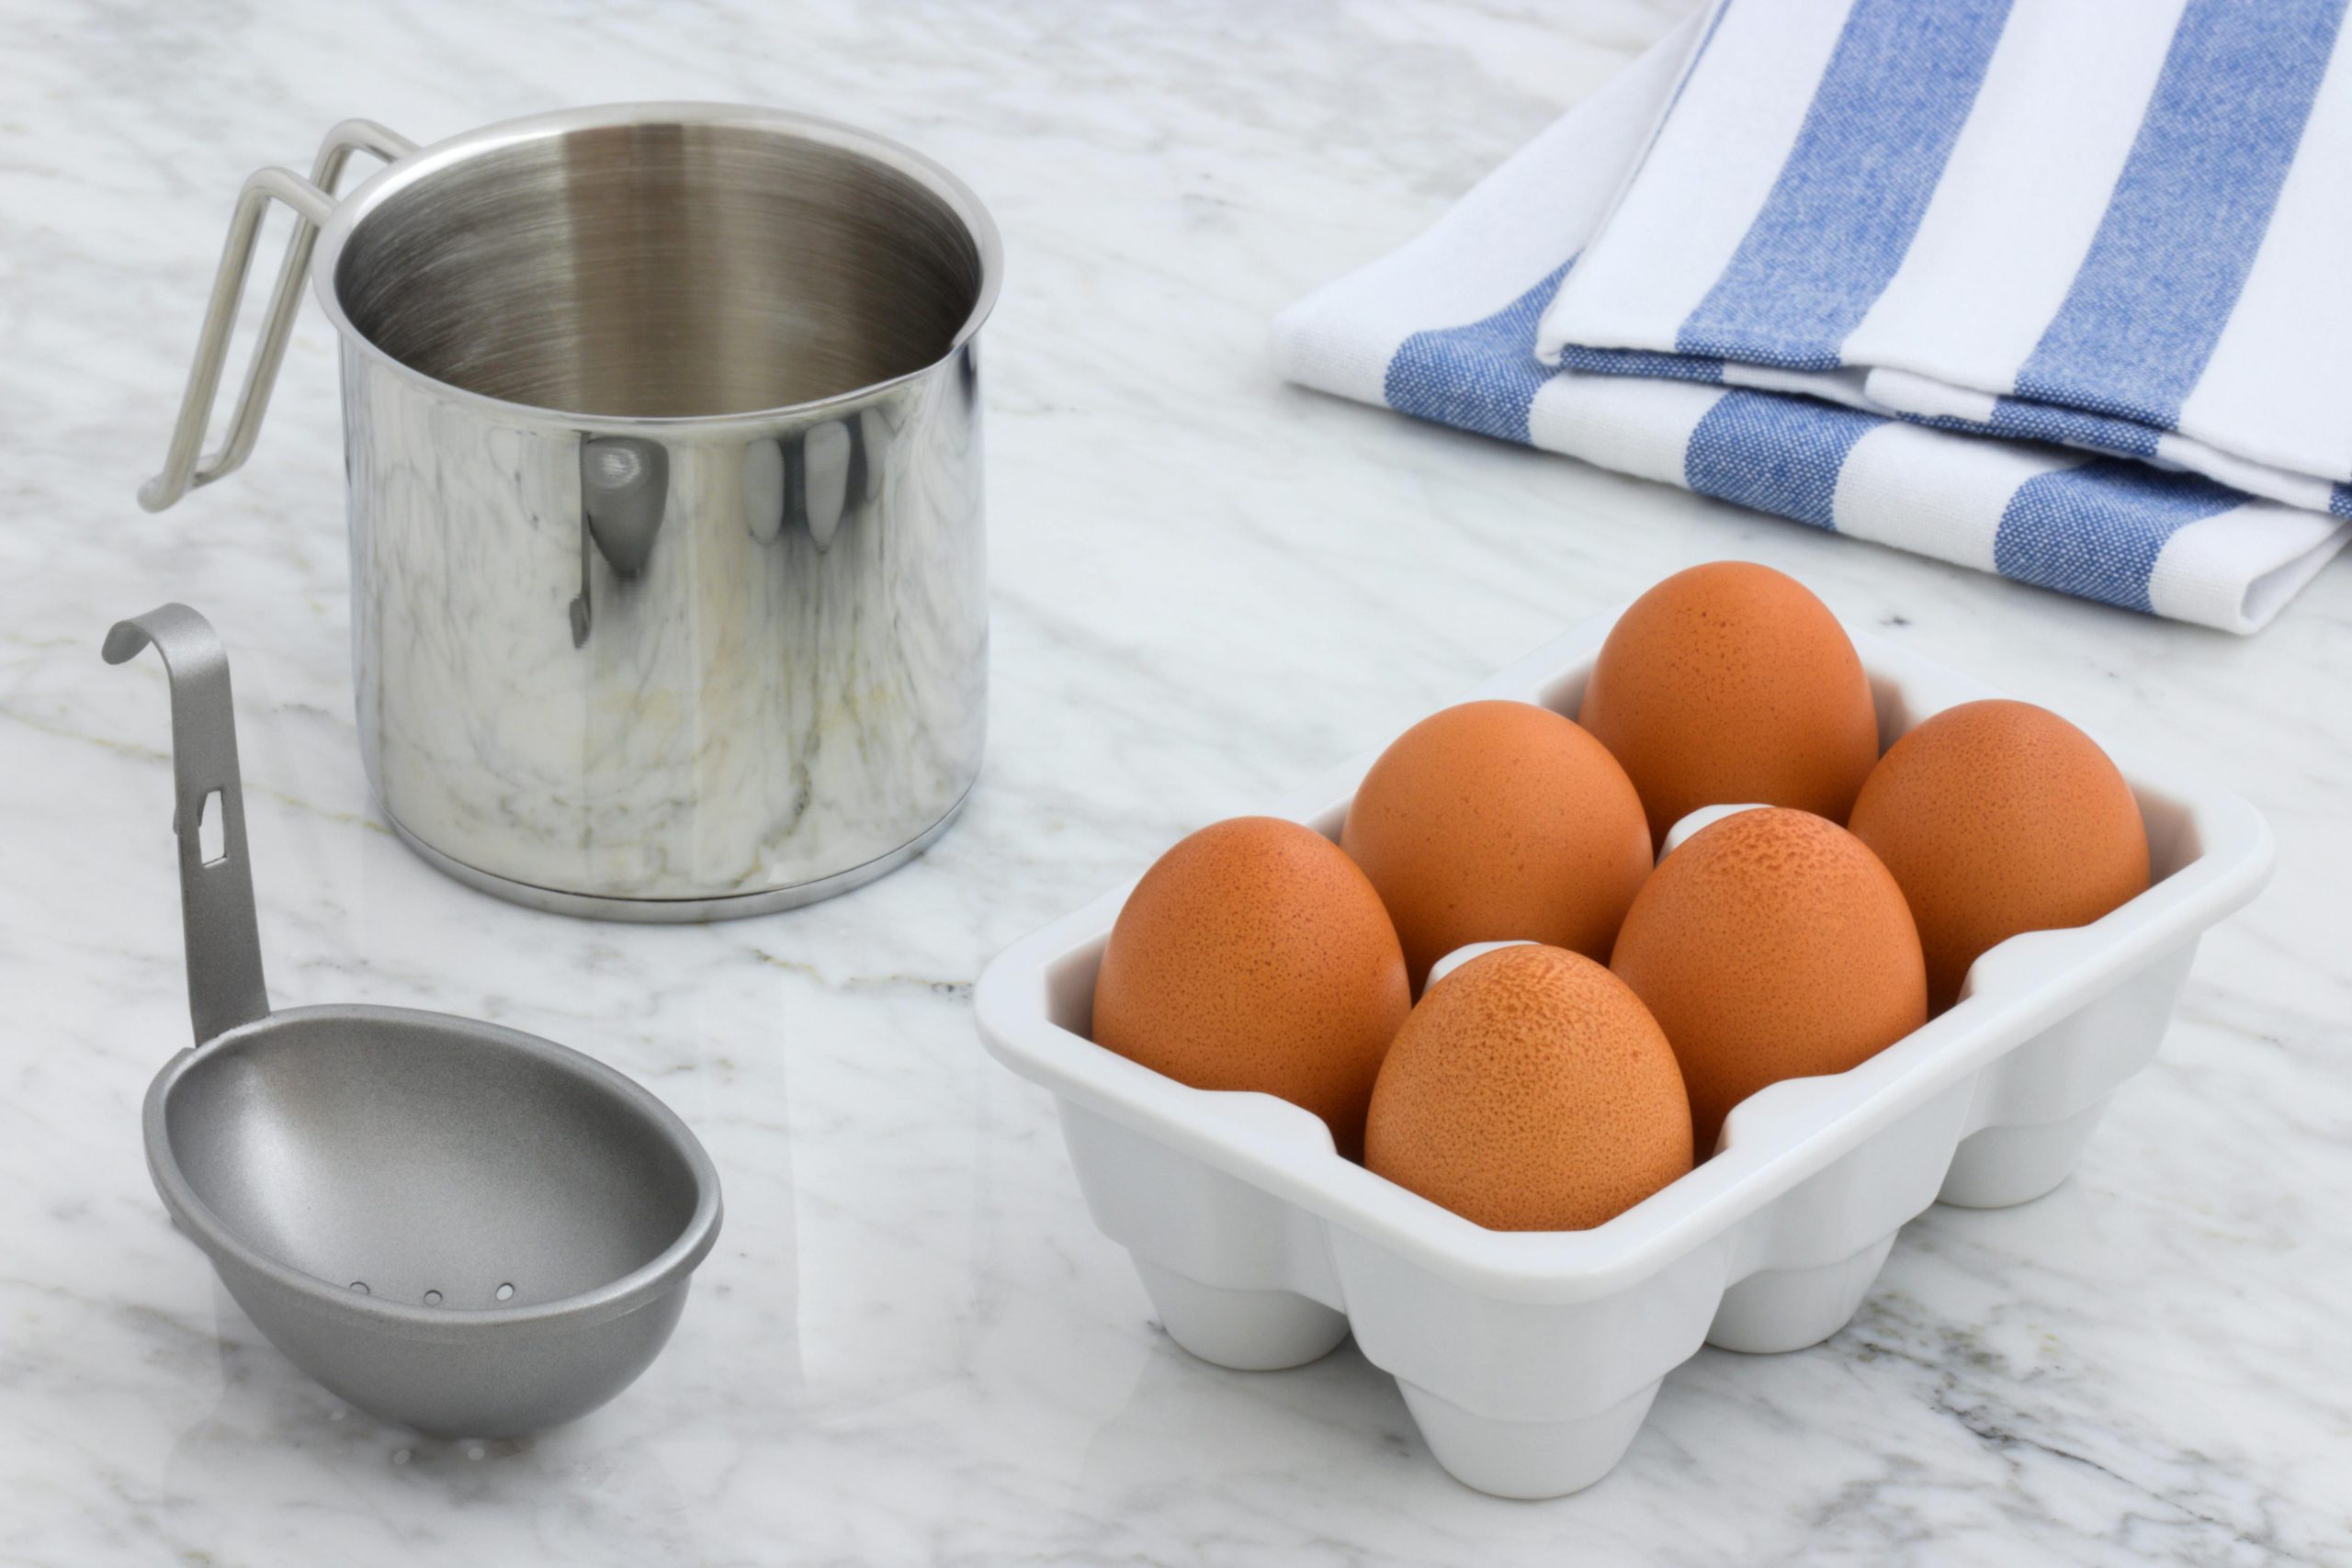 Hexclad vs All Clad: Which is the Best Cookware?